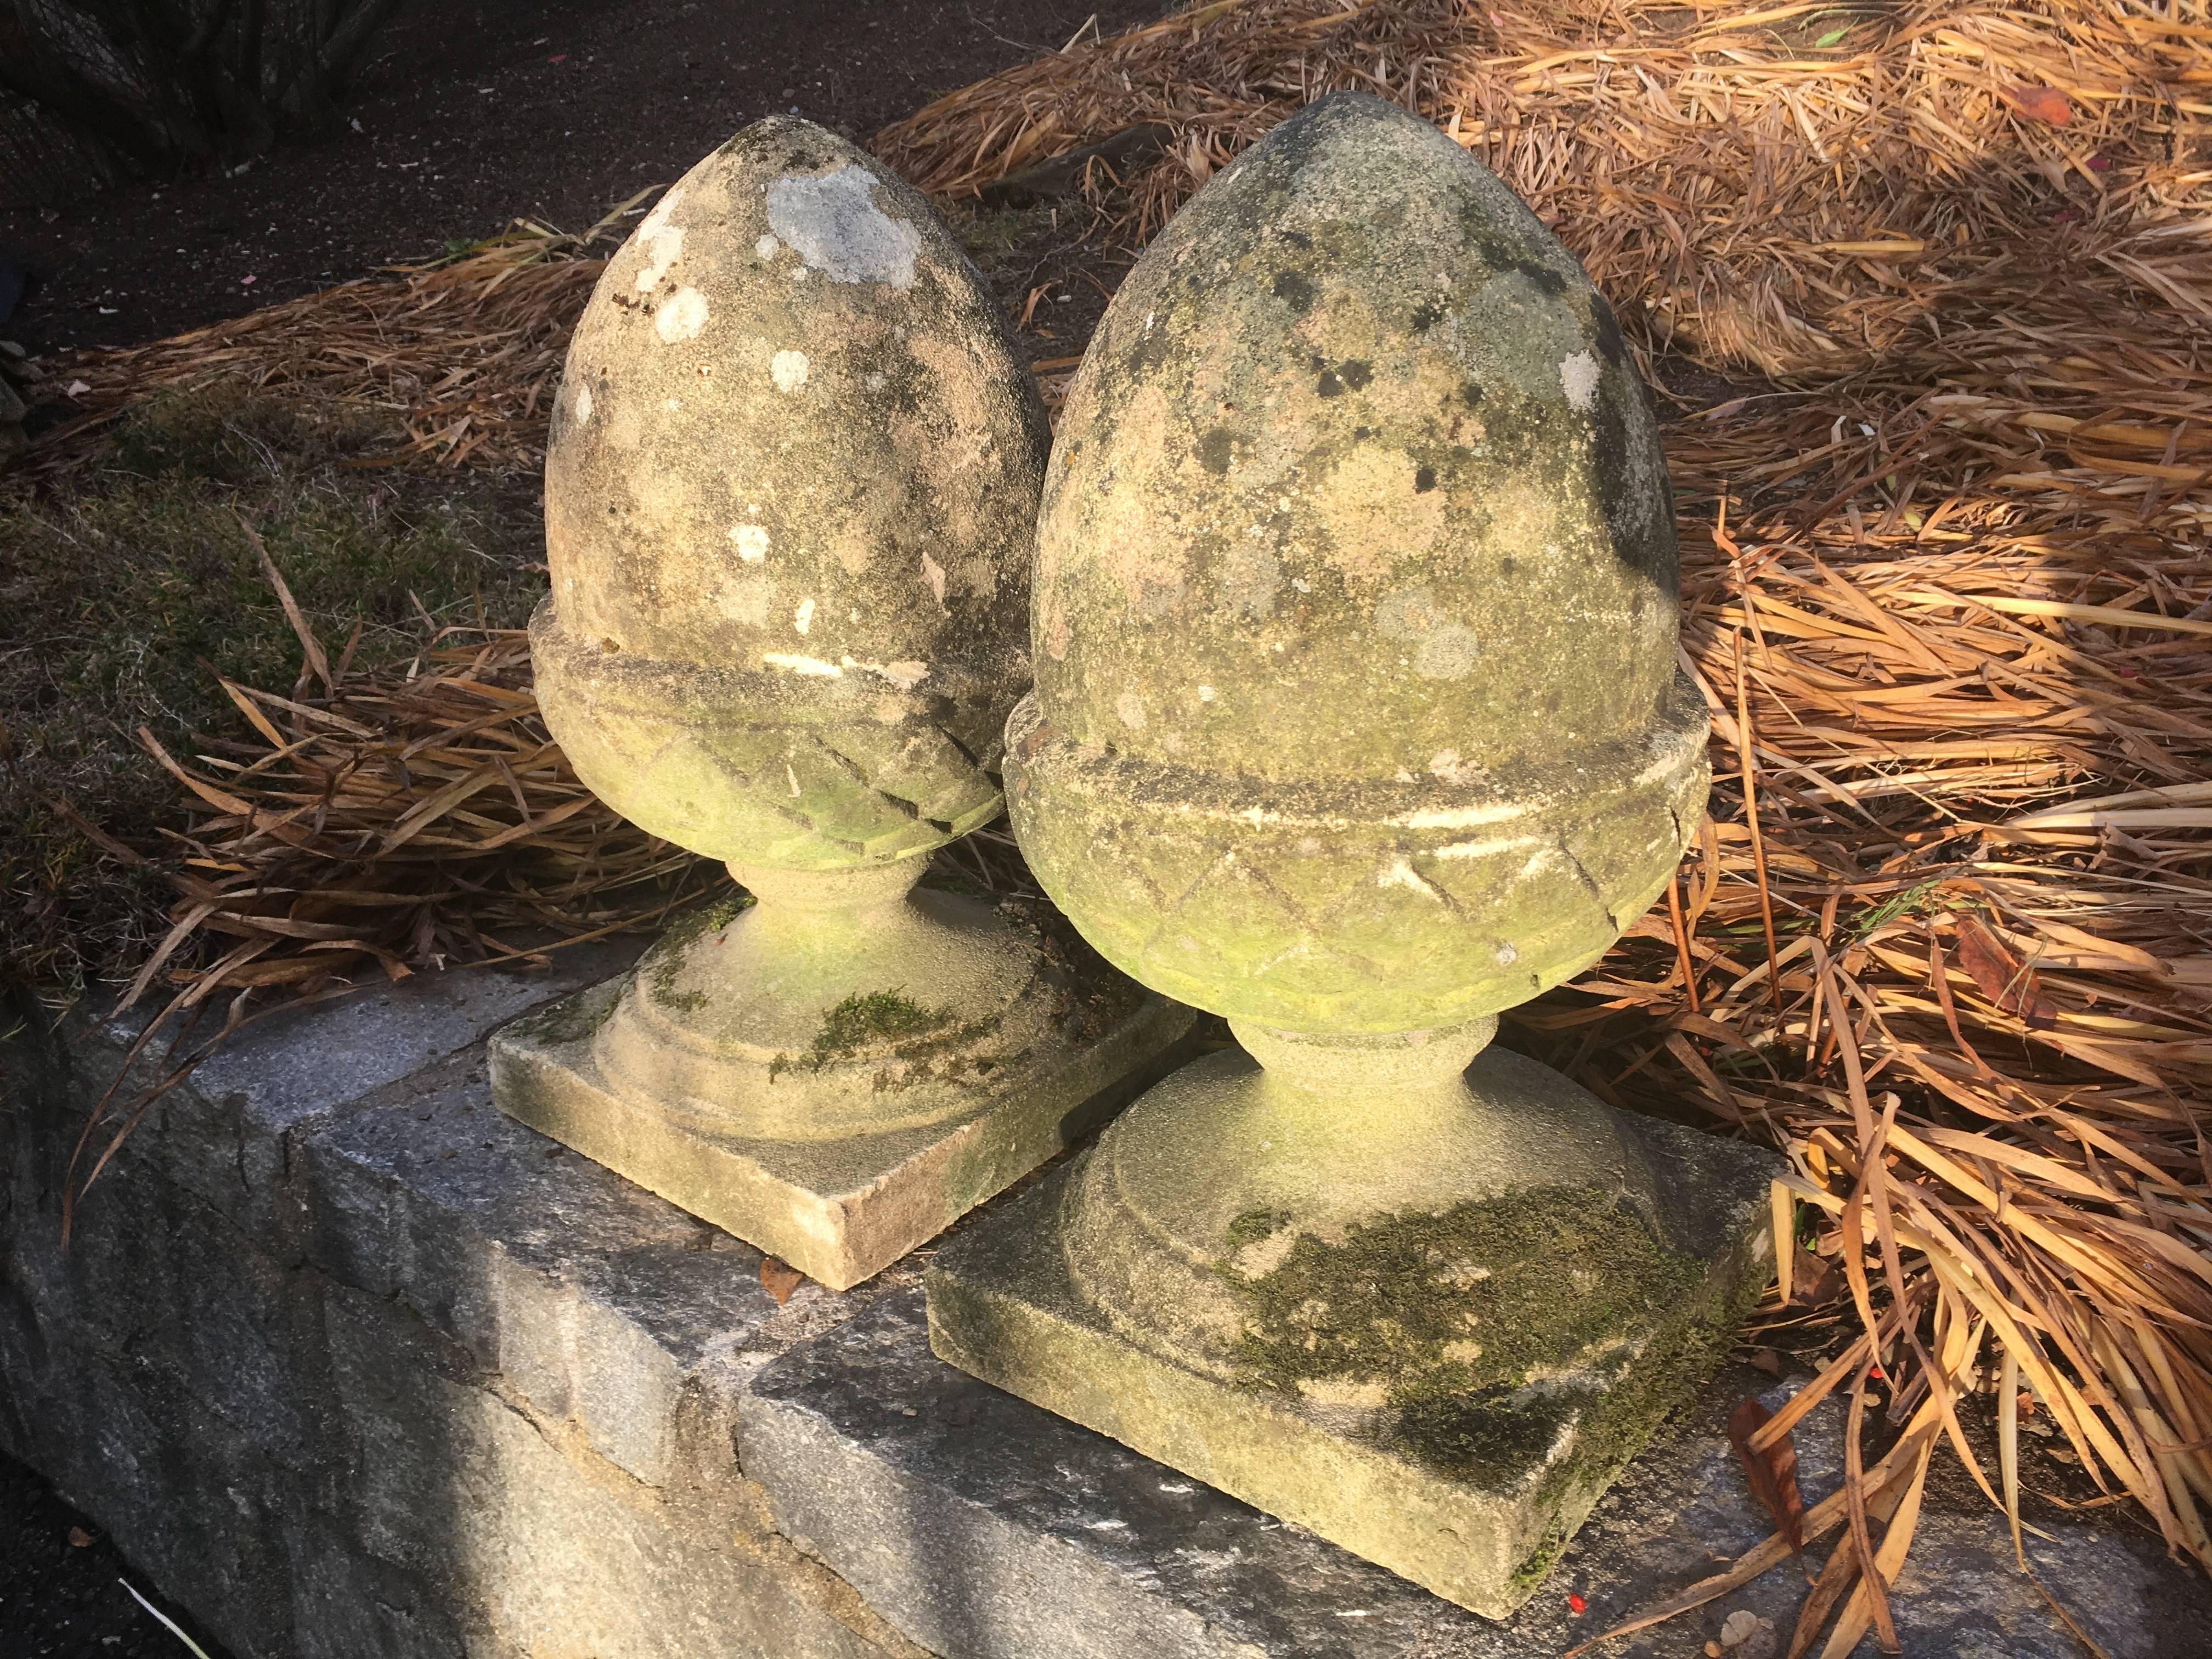 This Classic pair of English cast stone finials in the shape of acorns is beautifully-weathered and lichened and features lots of moss. Perfect flanking the top of a stone wall, on either side of your garden entrance, or on a mantel. In perfect